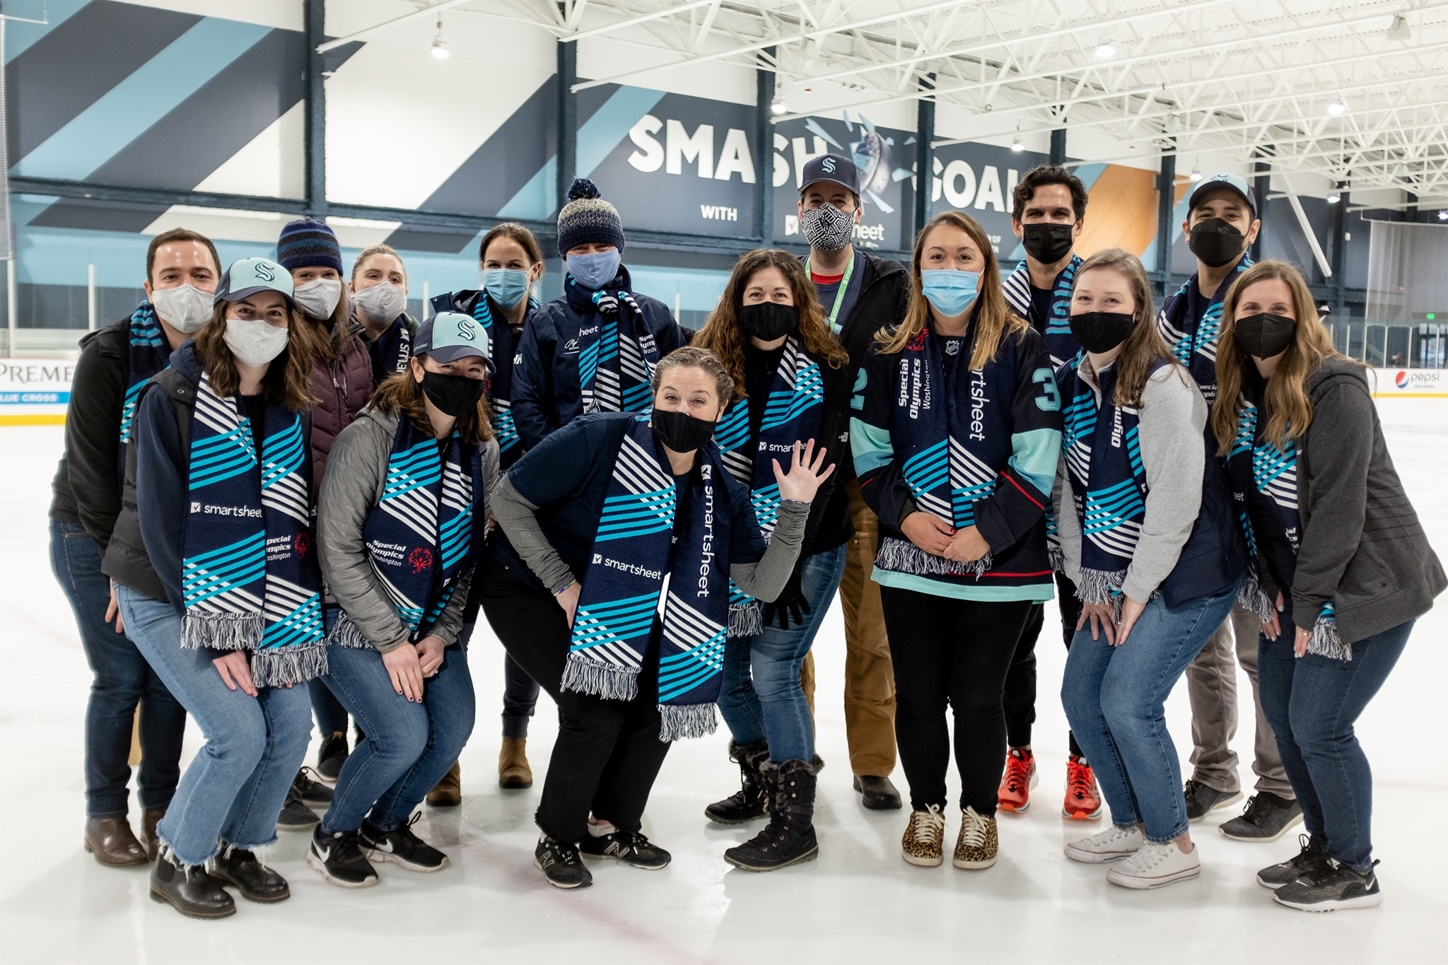 Smartsheet employees volunteering at an event for Special Olympics athletes at the Kraken Community Iceplex.